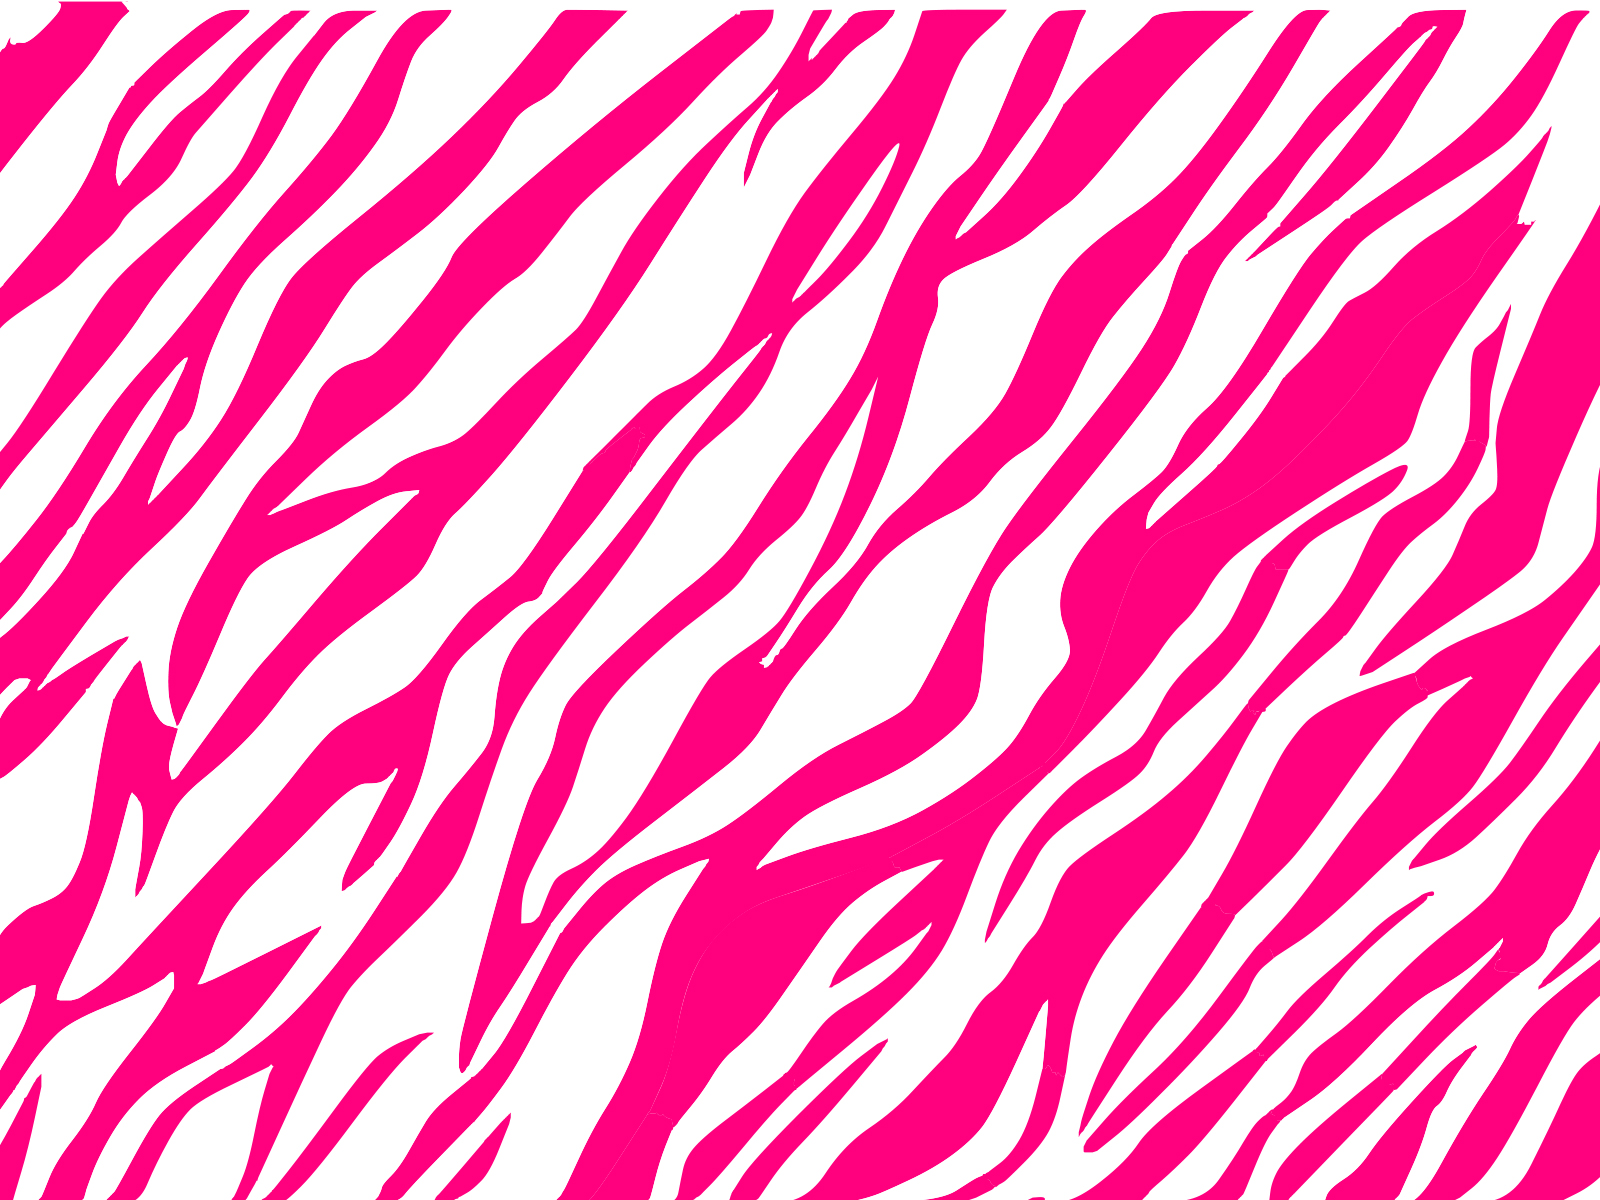 And White Zebra  Pattern Pink White  PPT Graphic